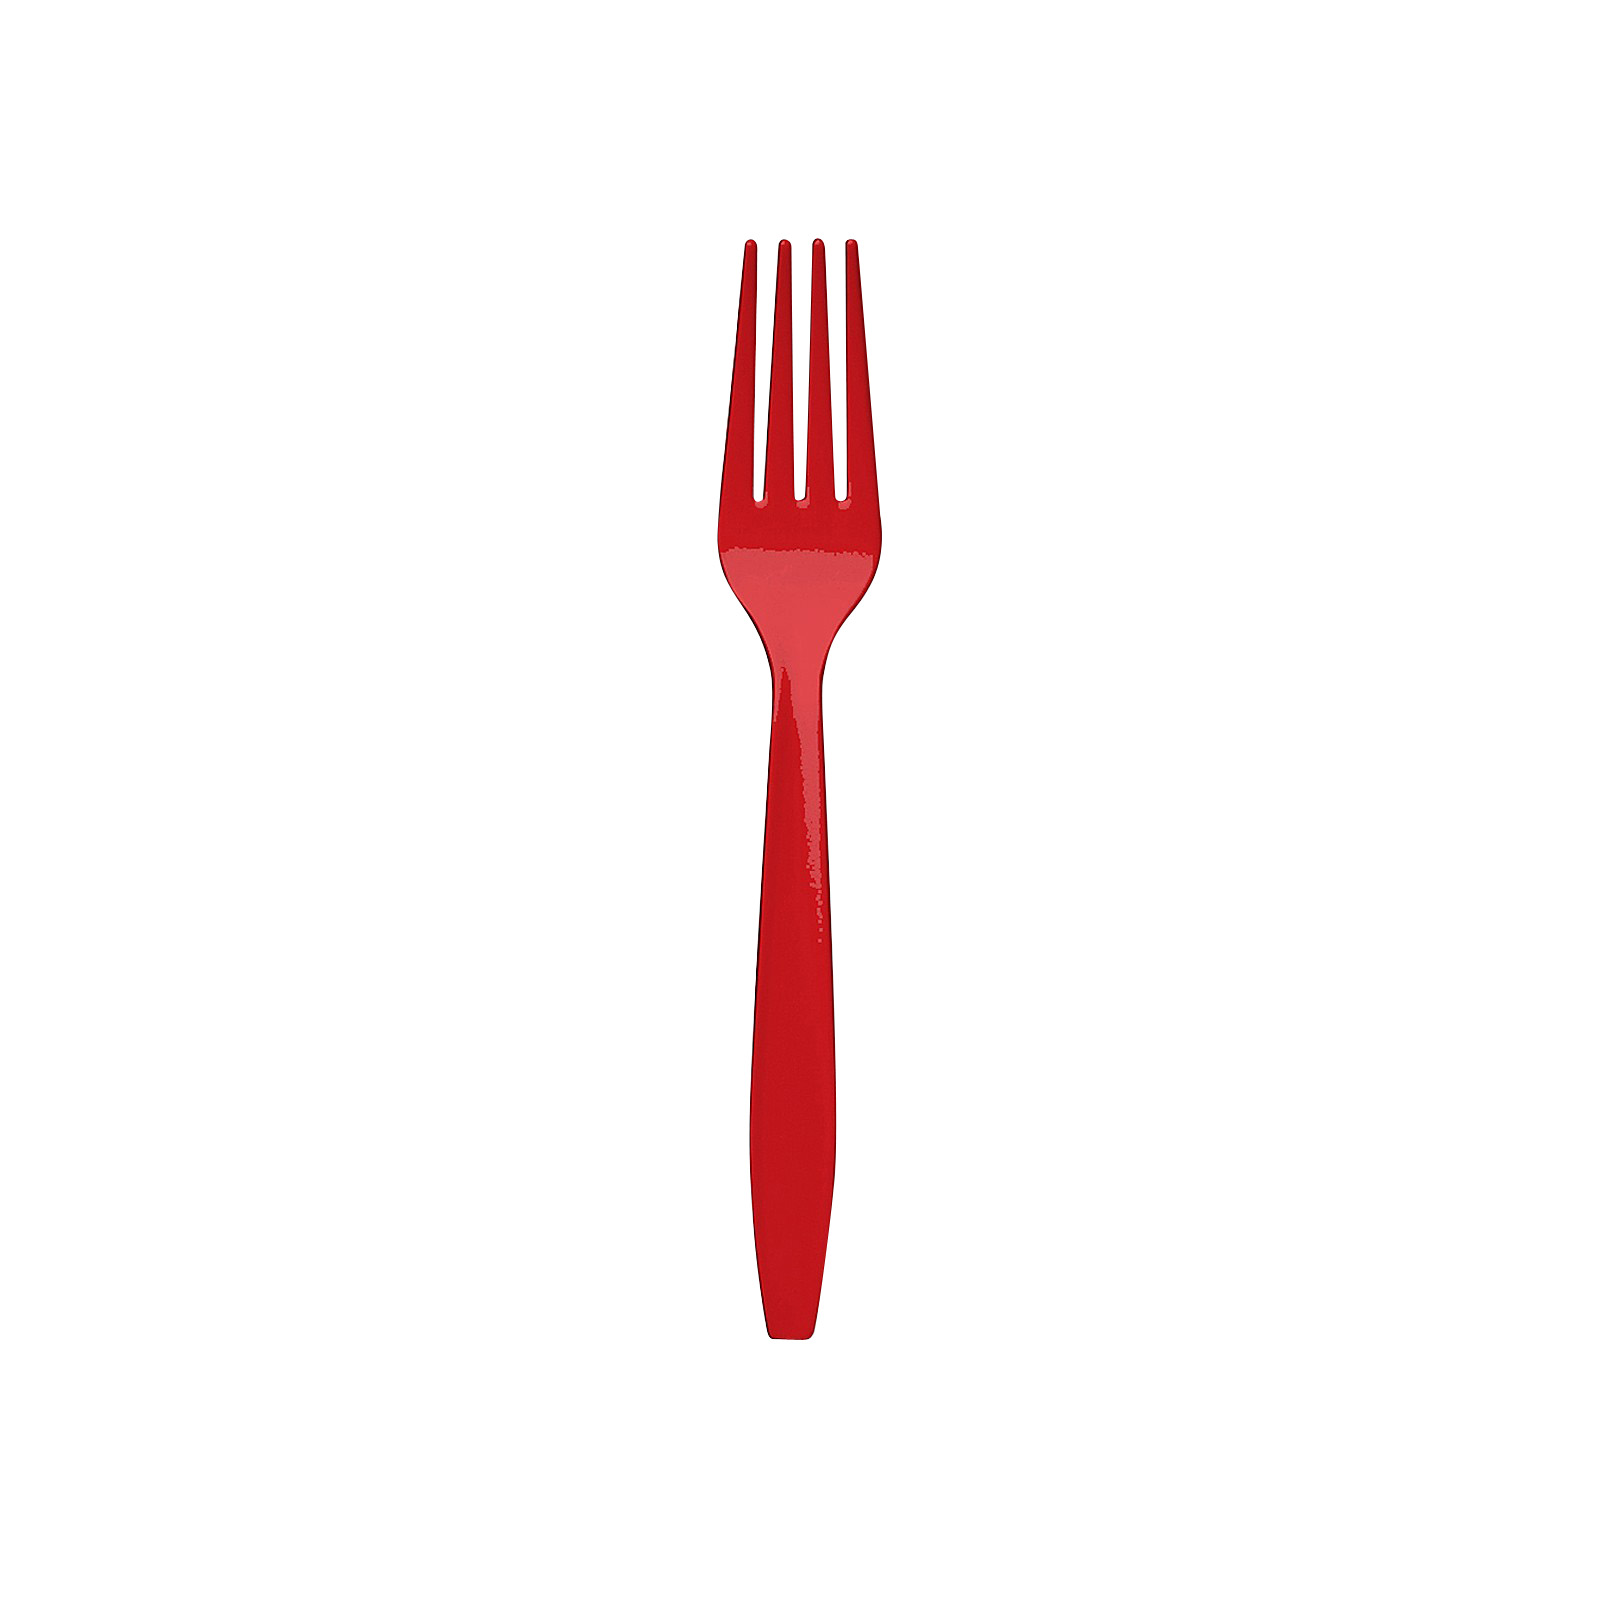 Free Pictures Of Forks, Download Free Clip Art, Free Clip